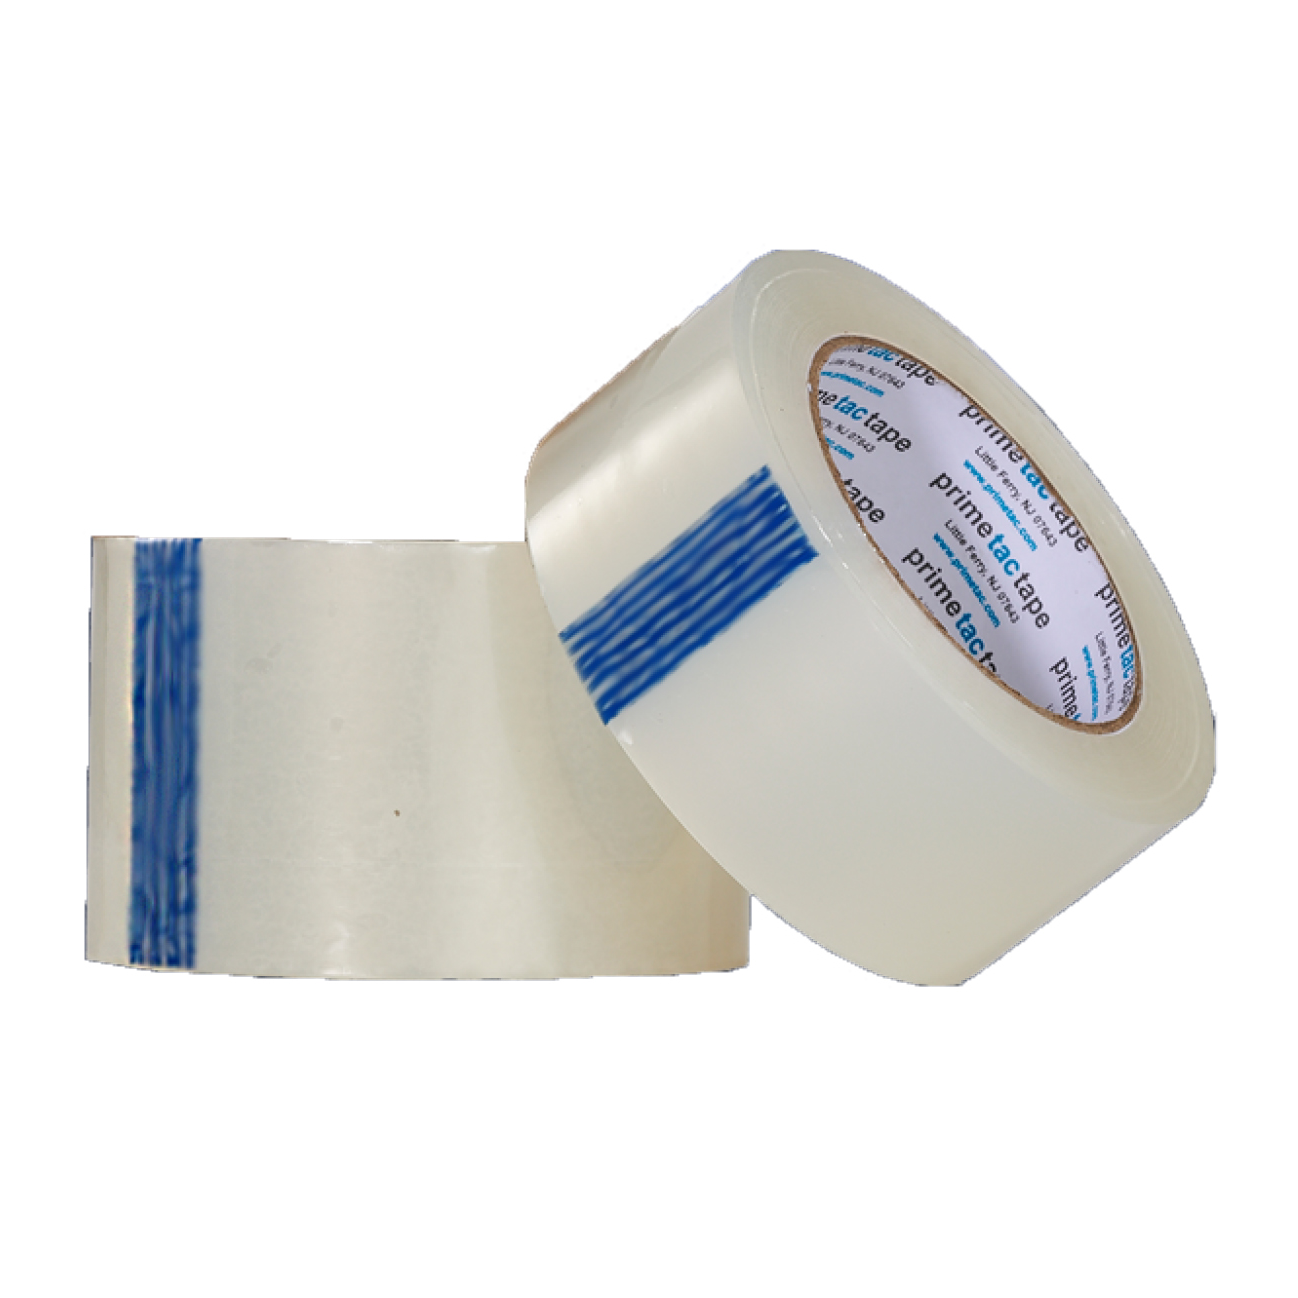 3-CST 3 inch x 110 Yard roll of Carton Sealing Tape - Case of 6 Rolls